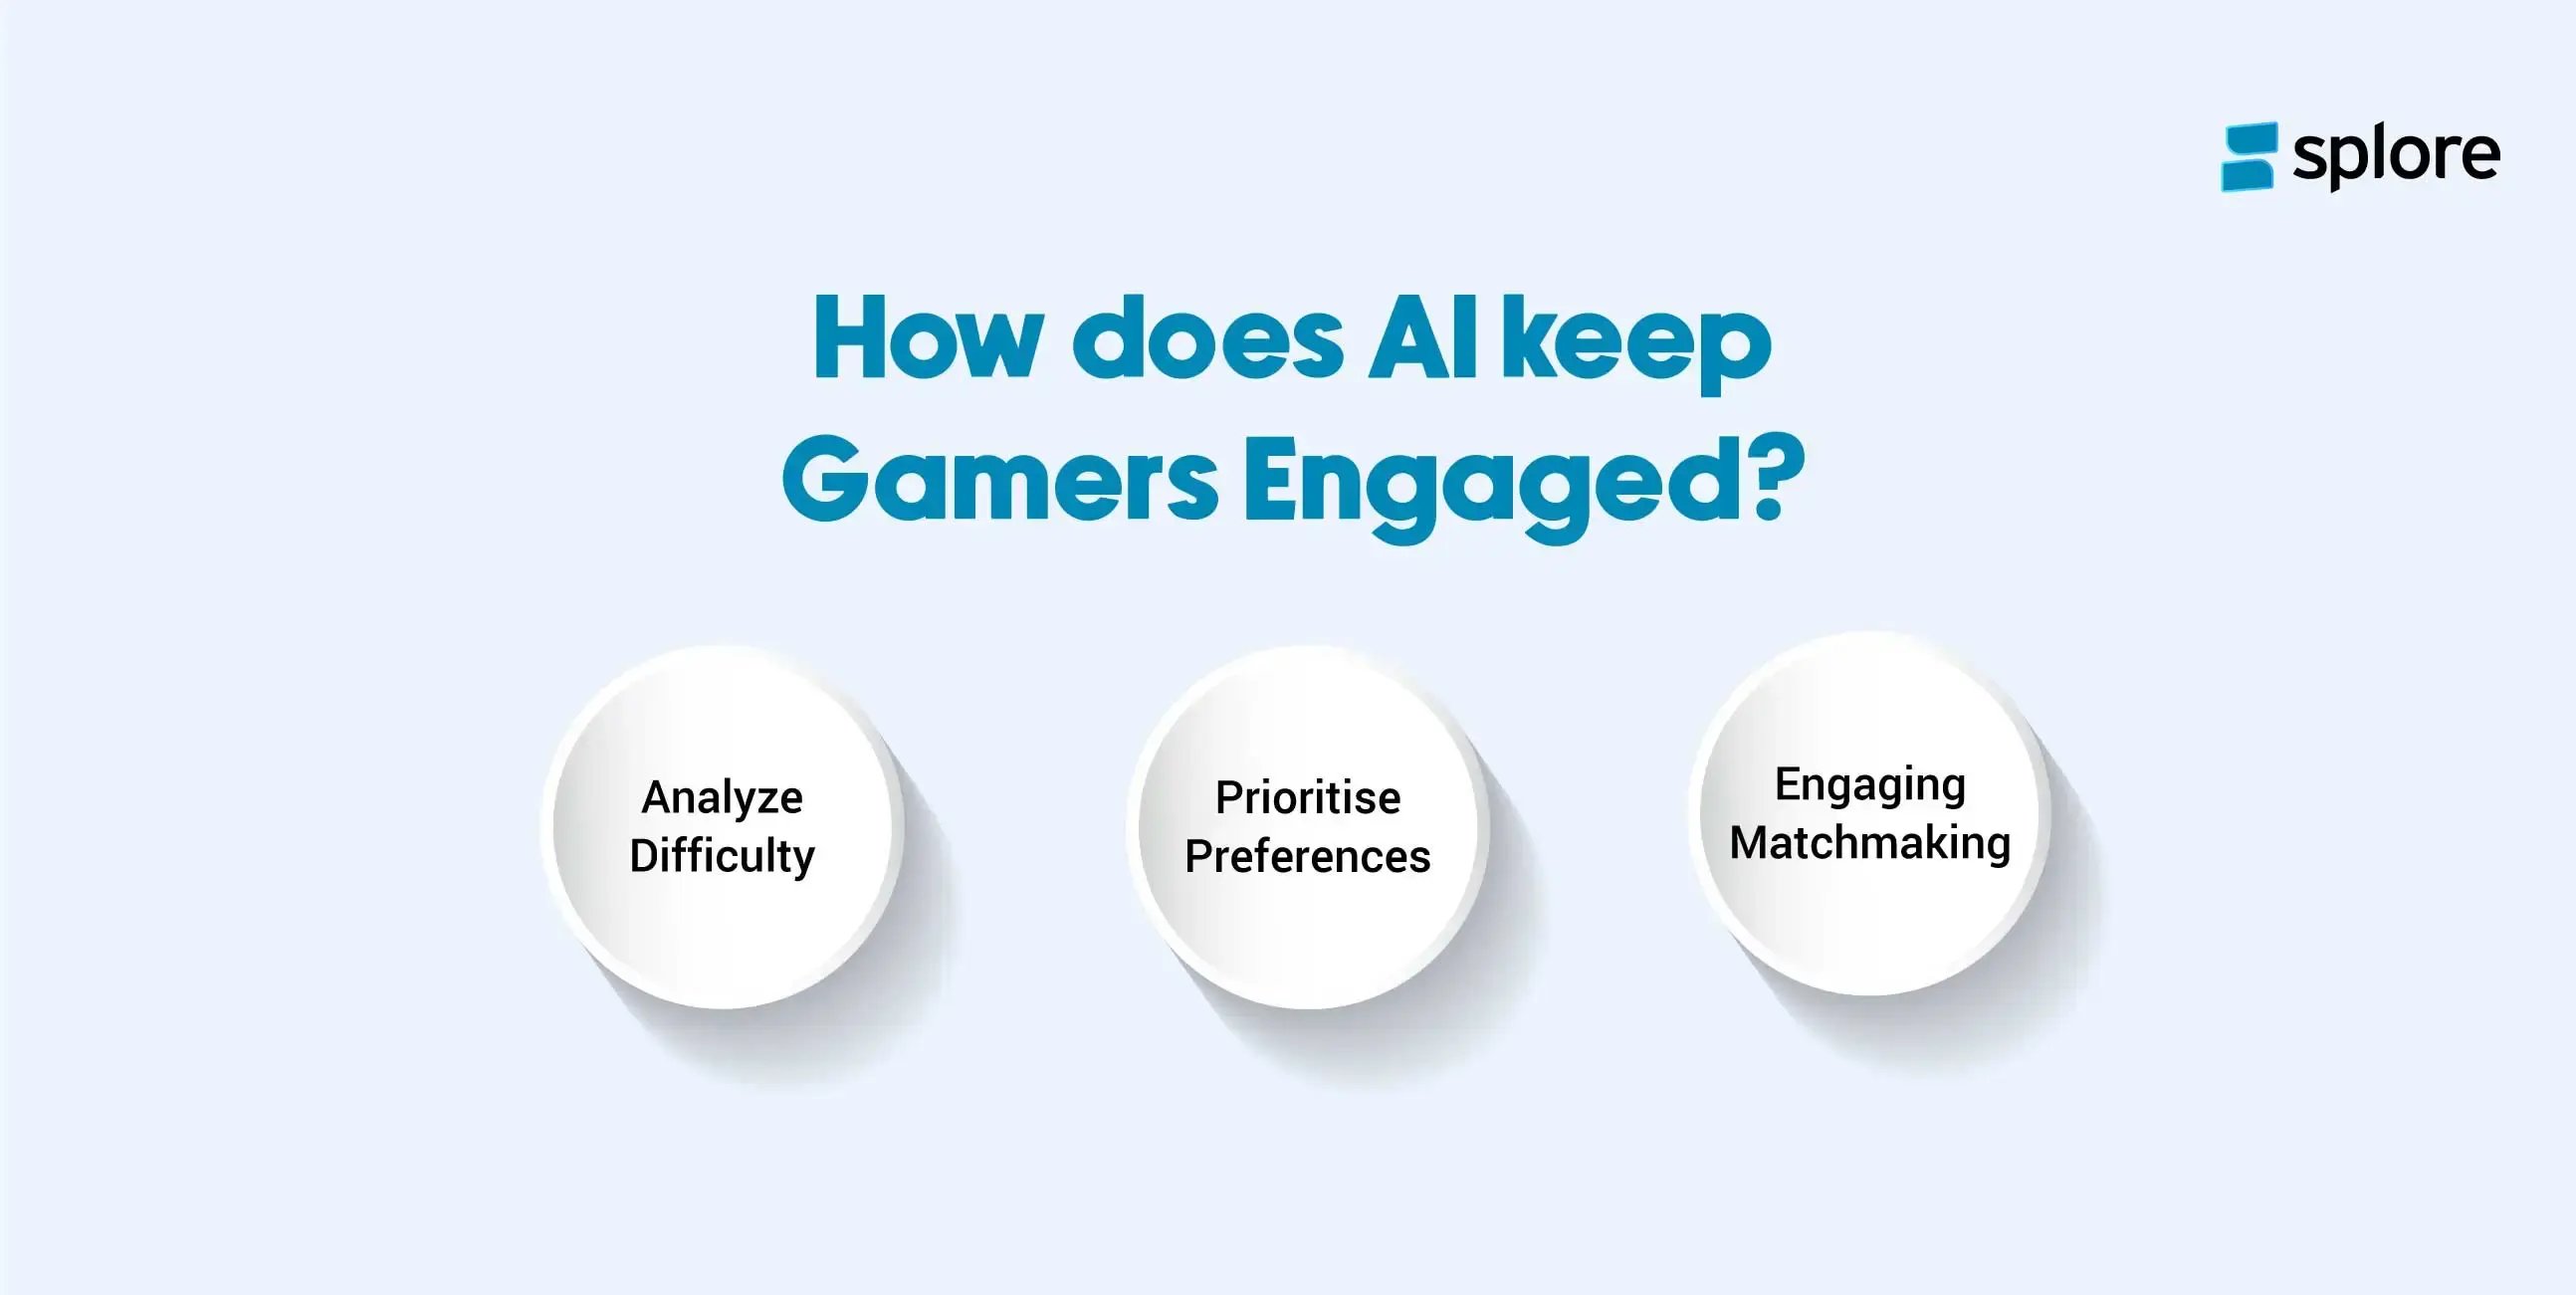 How Does AI Keep Gamers Engaged?